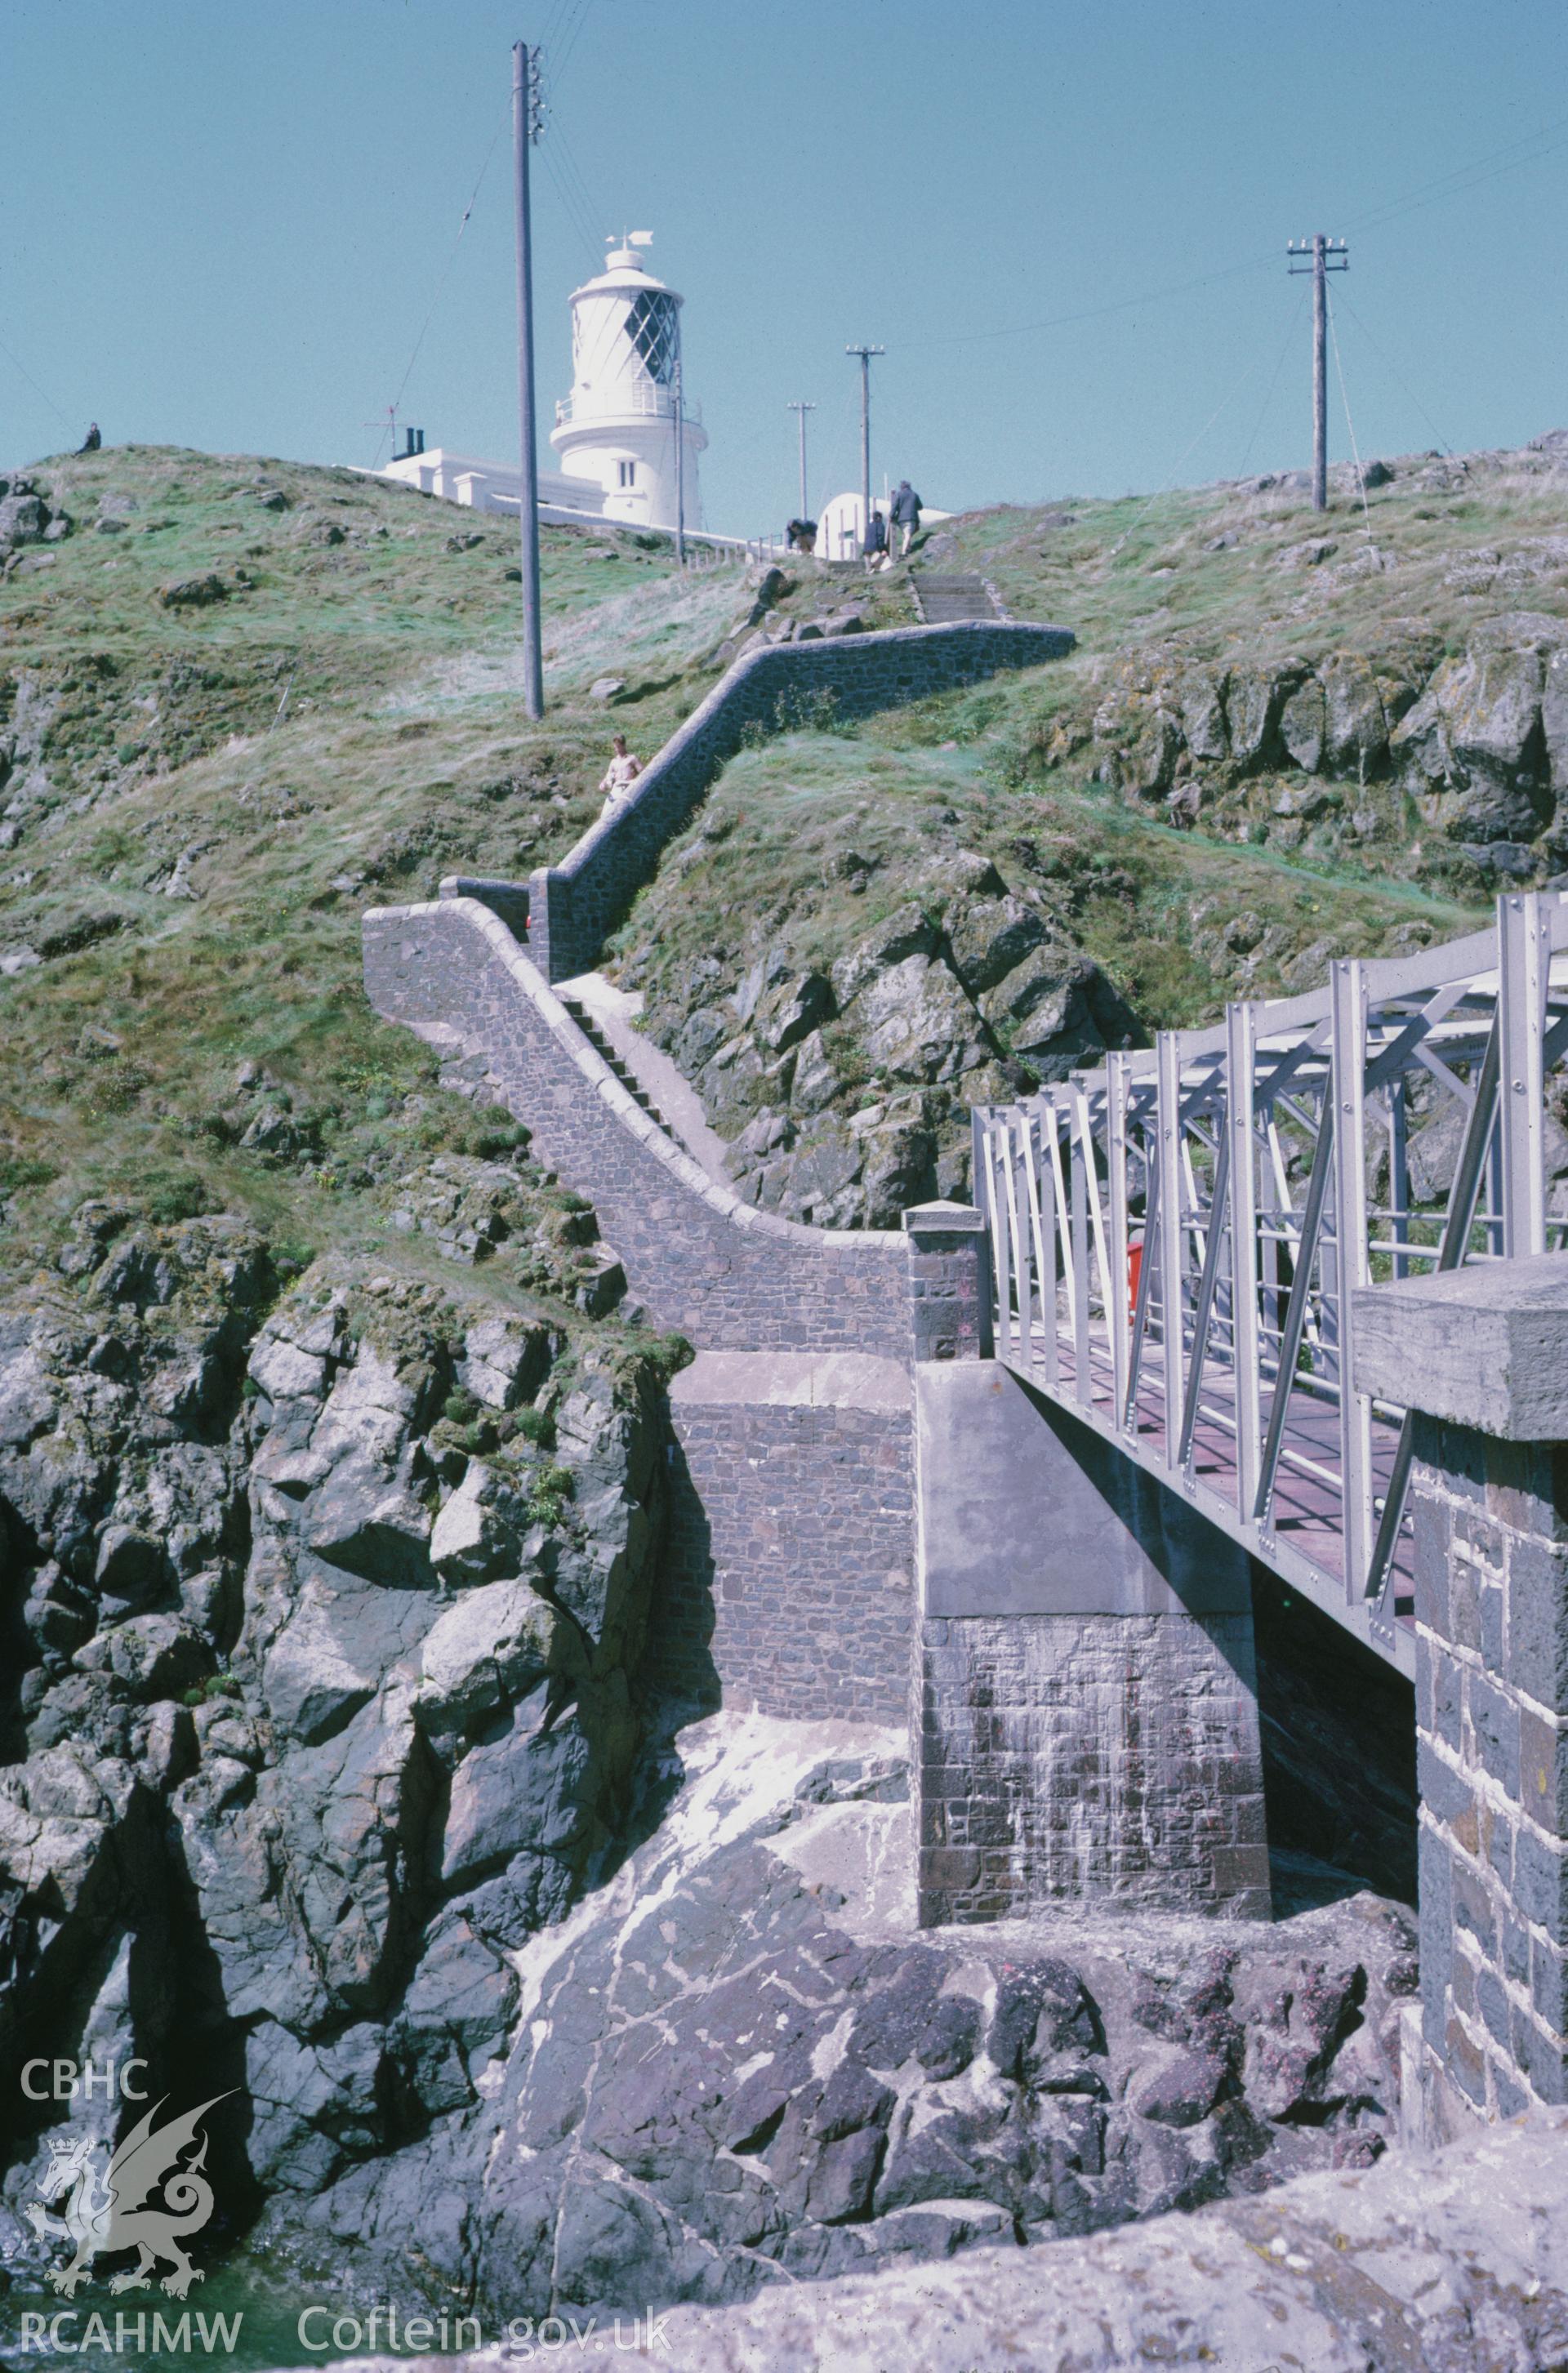 Colour 35mm slide of Strumble Head Lighthouse, Pembrokeshire, by Dylan Roberts.